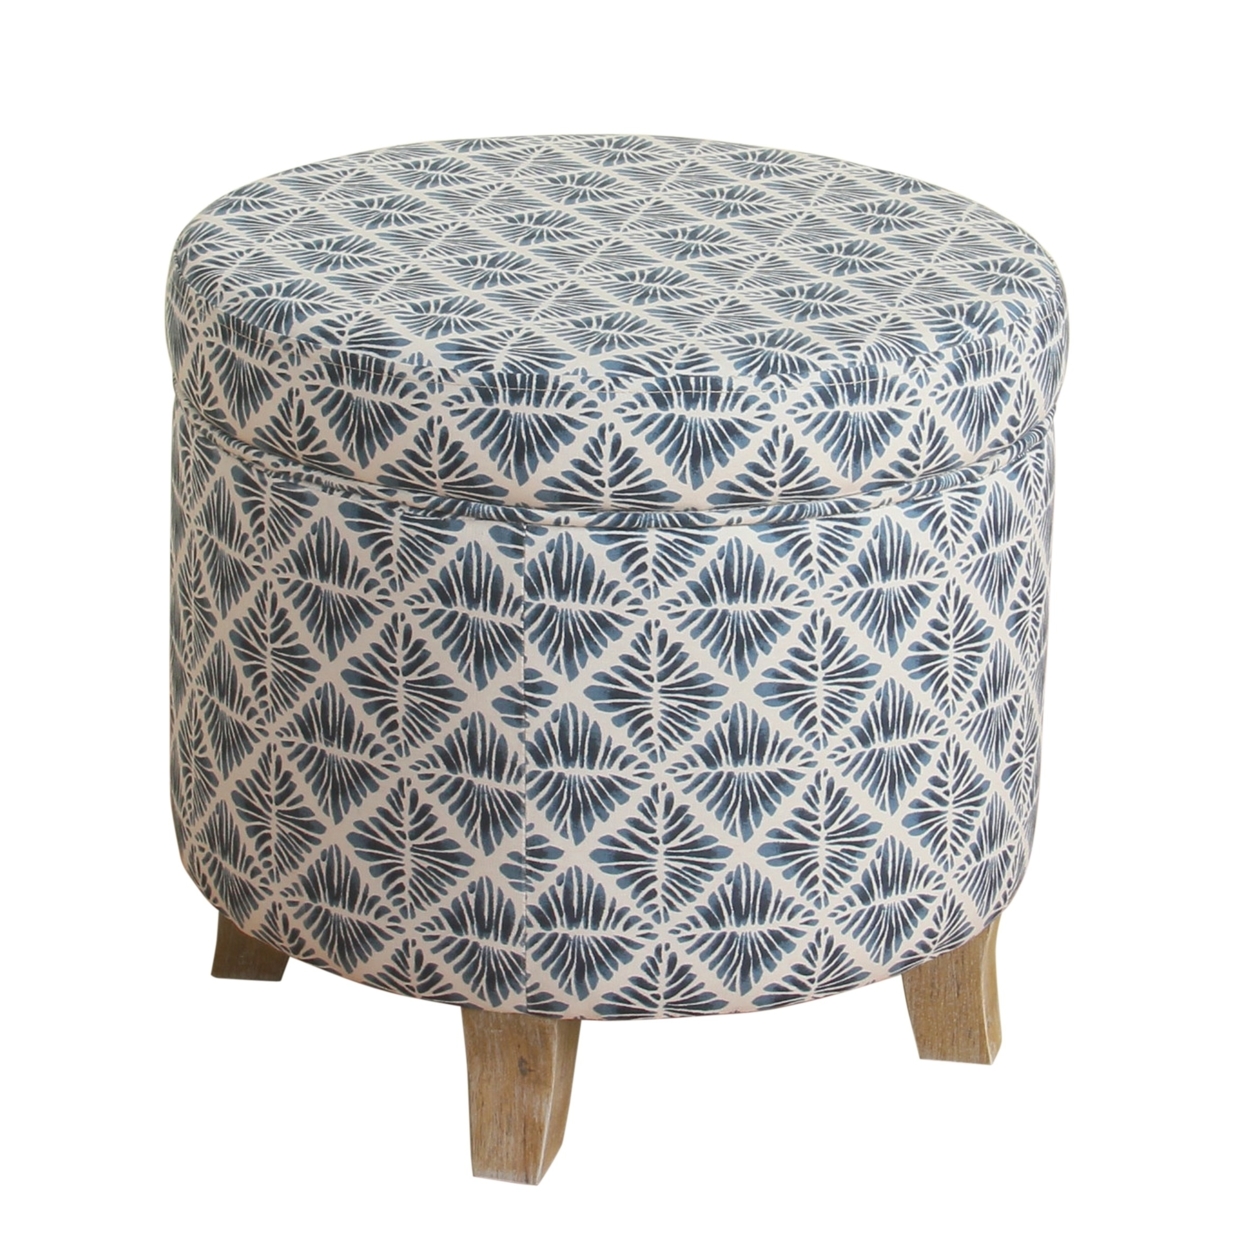 Round Shaped Fabric Upholstered Wooden Ottoman With Lift Off Lid Storage, Blue And White- Saltoro Sherpi